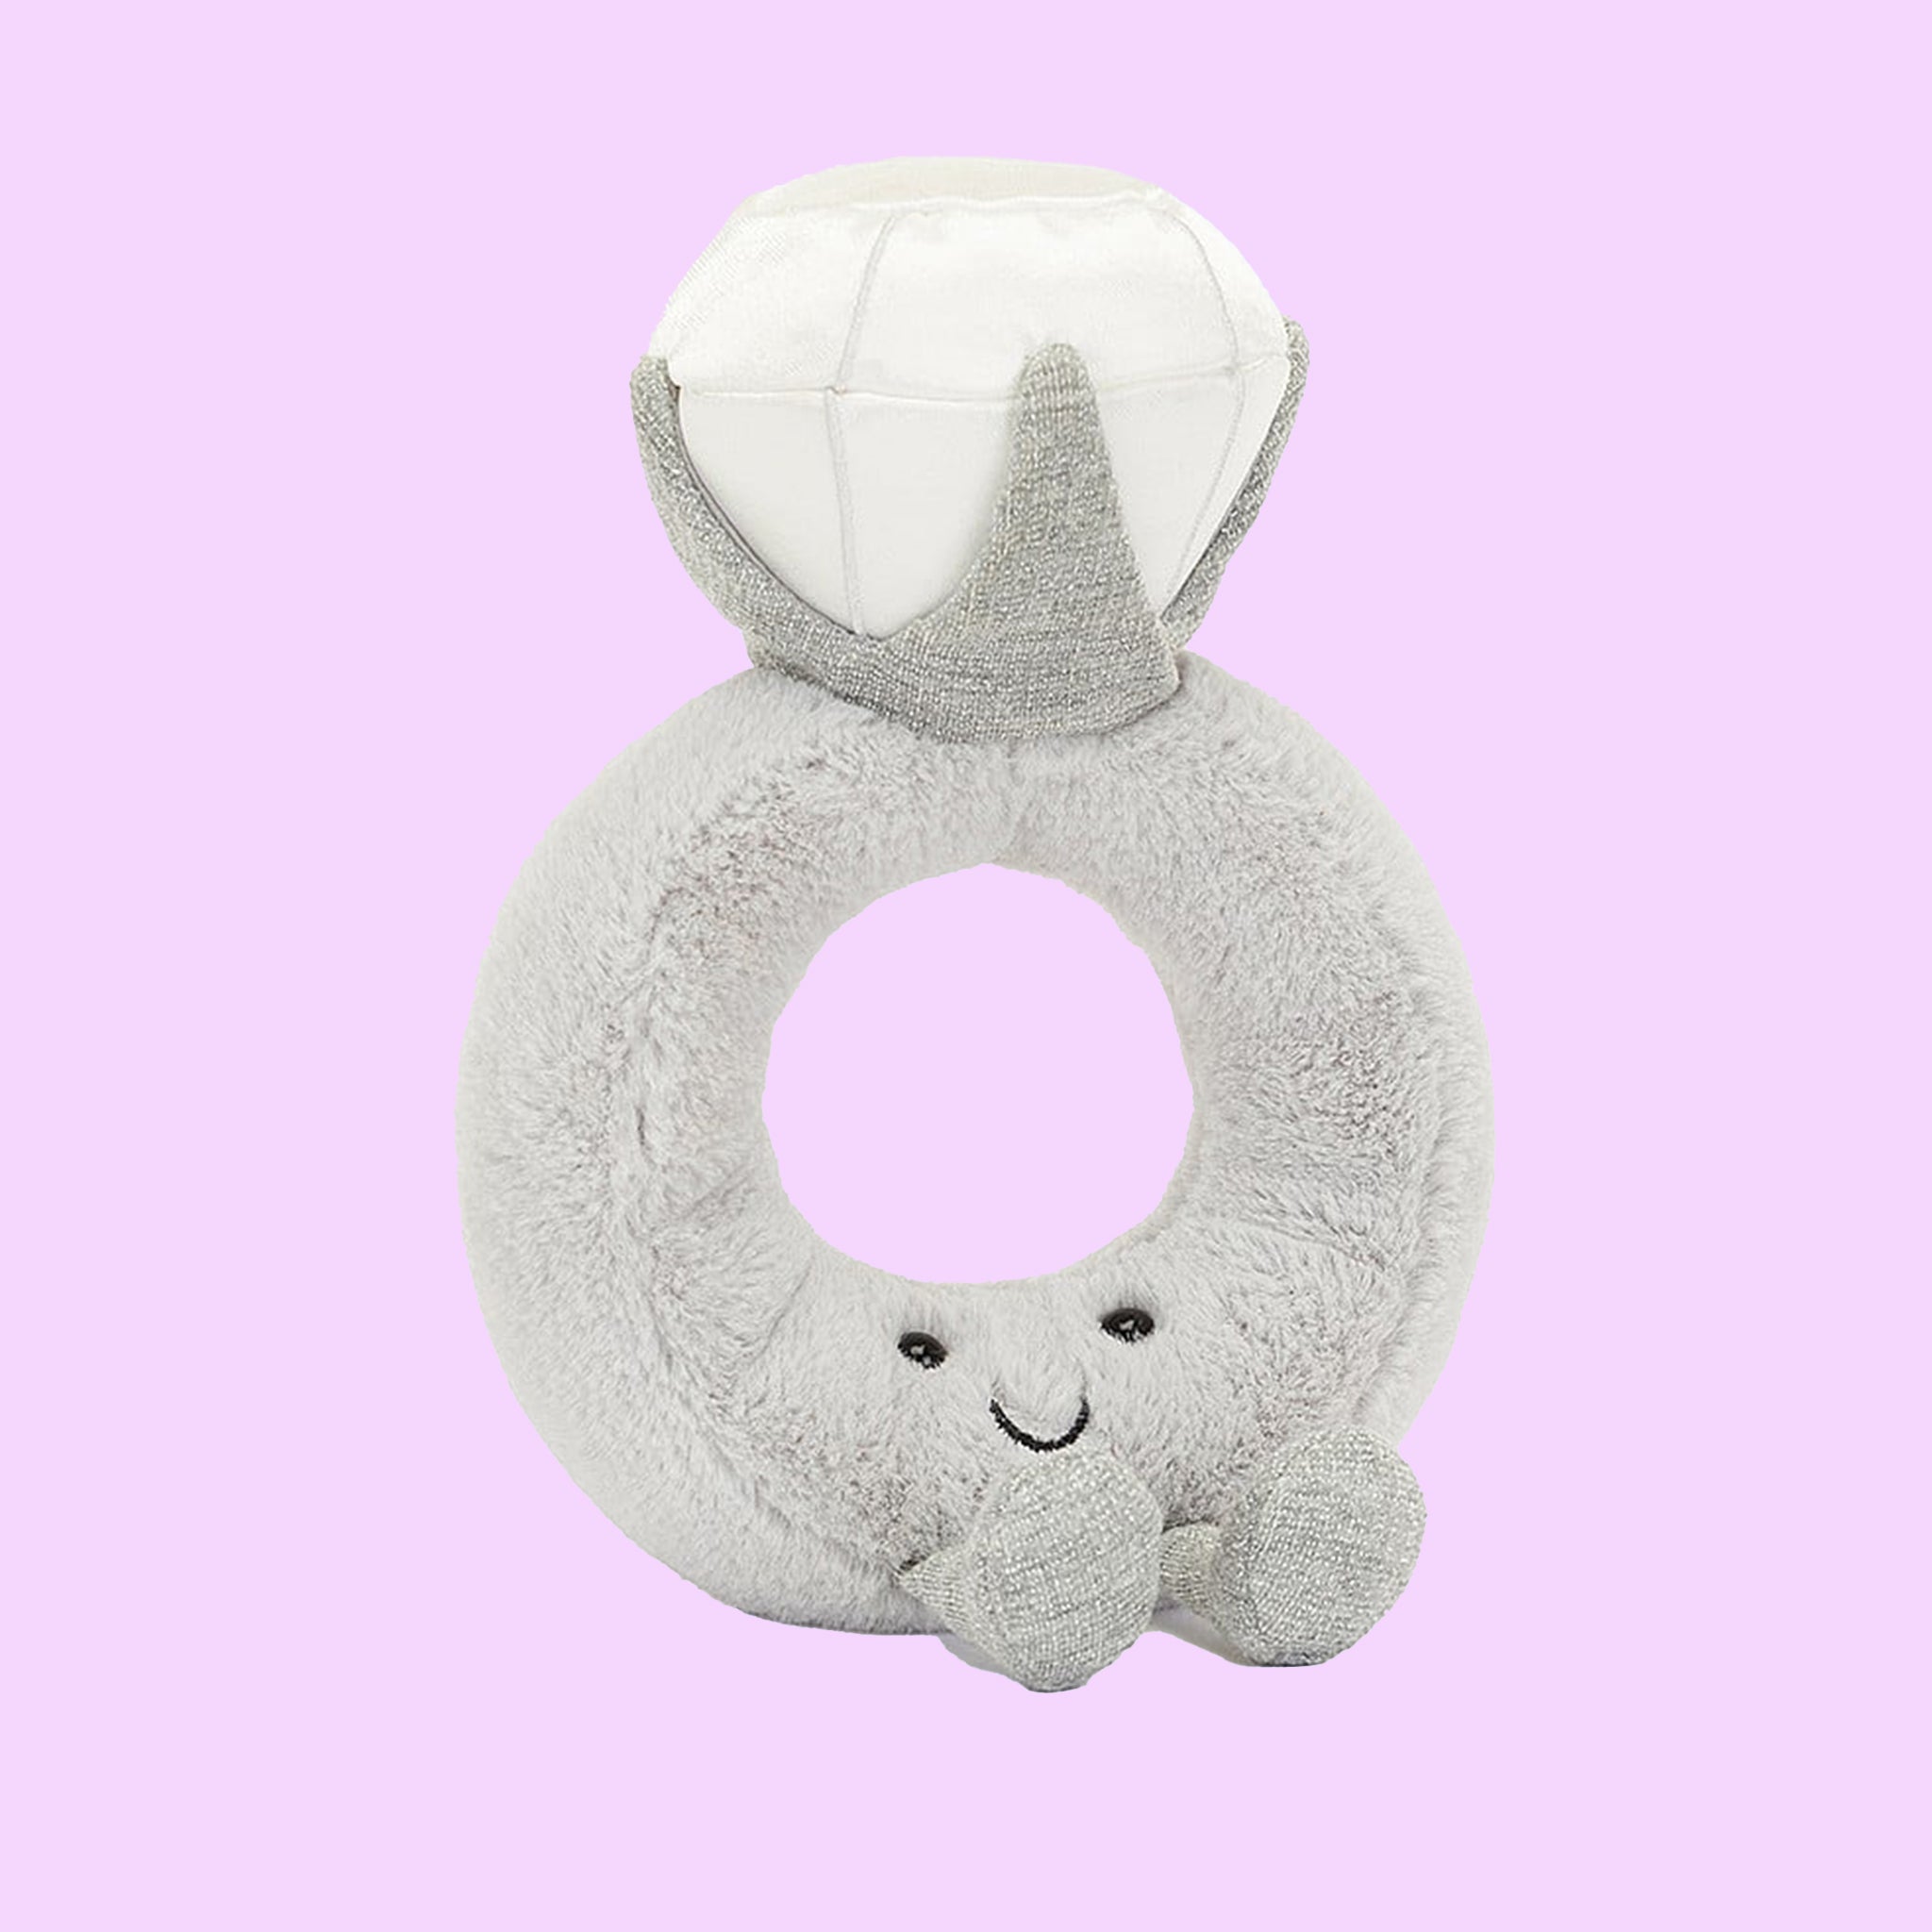 A grey stuffed toy in the shape of a diamond ring with a grey band and a white diamond shape along with a smiling face and feet on the front.